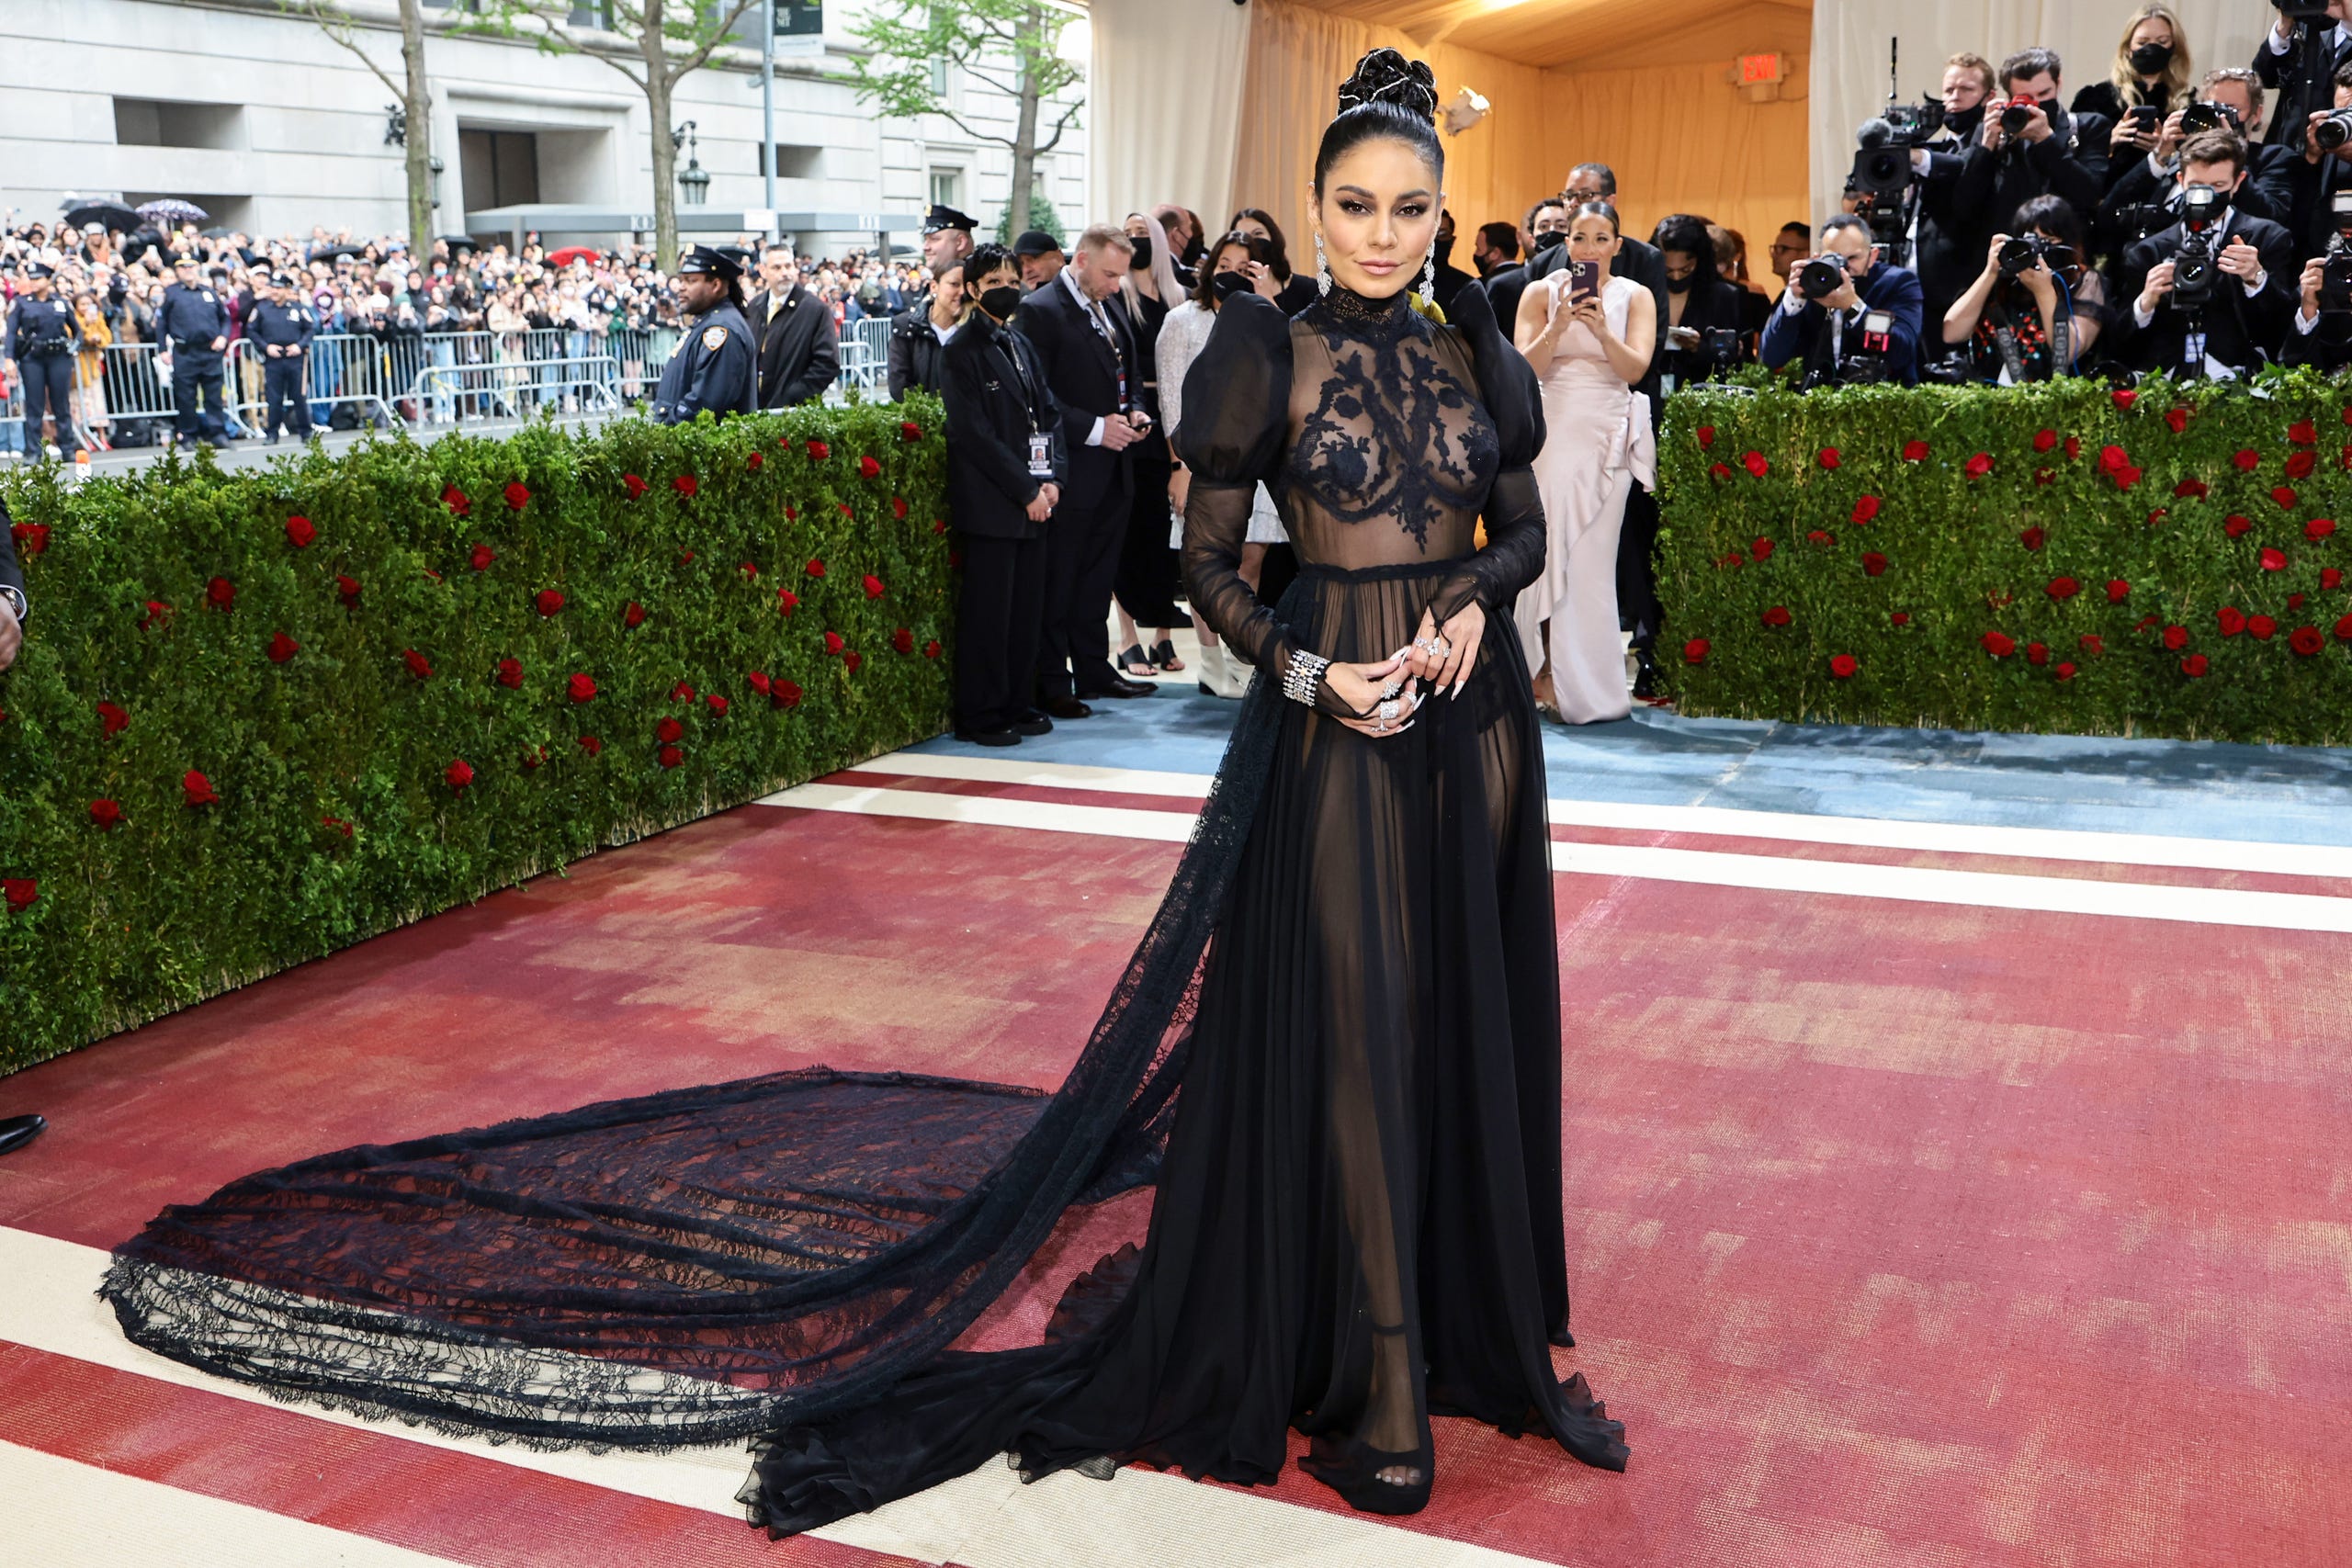 Vanessa Hudgens attends The 2022 Met Gala Celebrating "In America: An Anthology of Fashion" at The Metropolitan Museum of Art on May 02, 2022 in New York City.